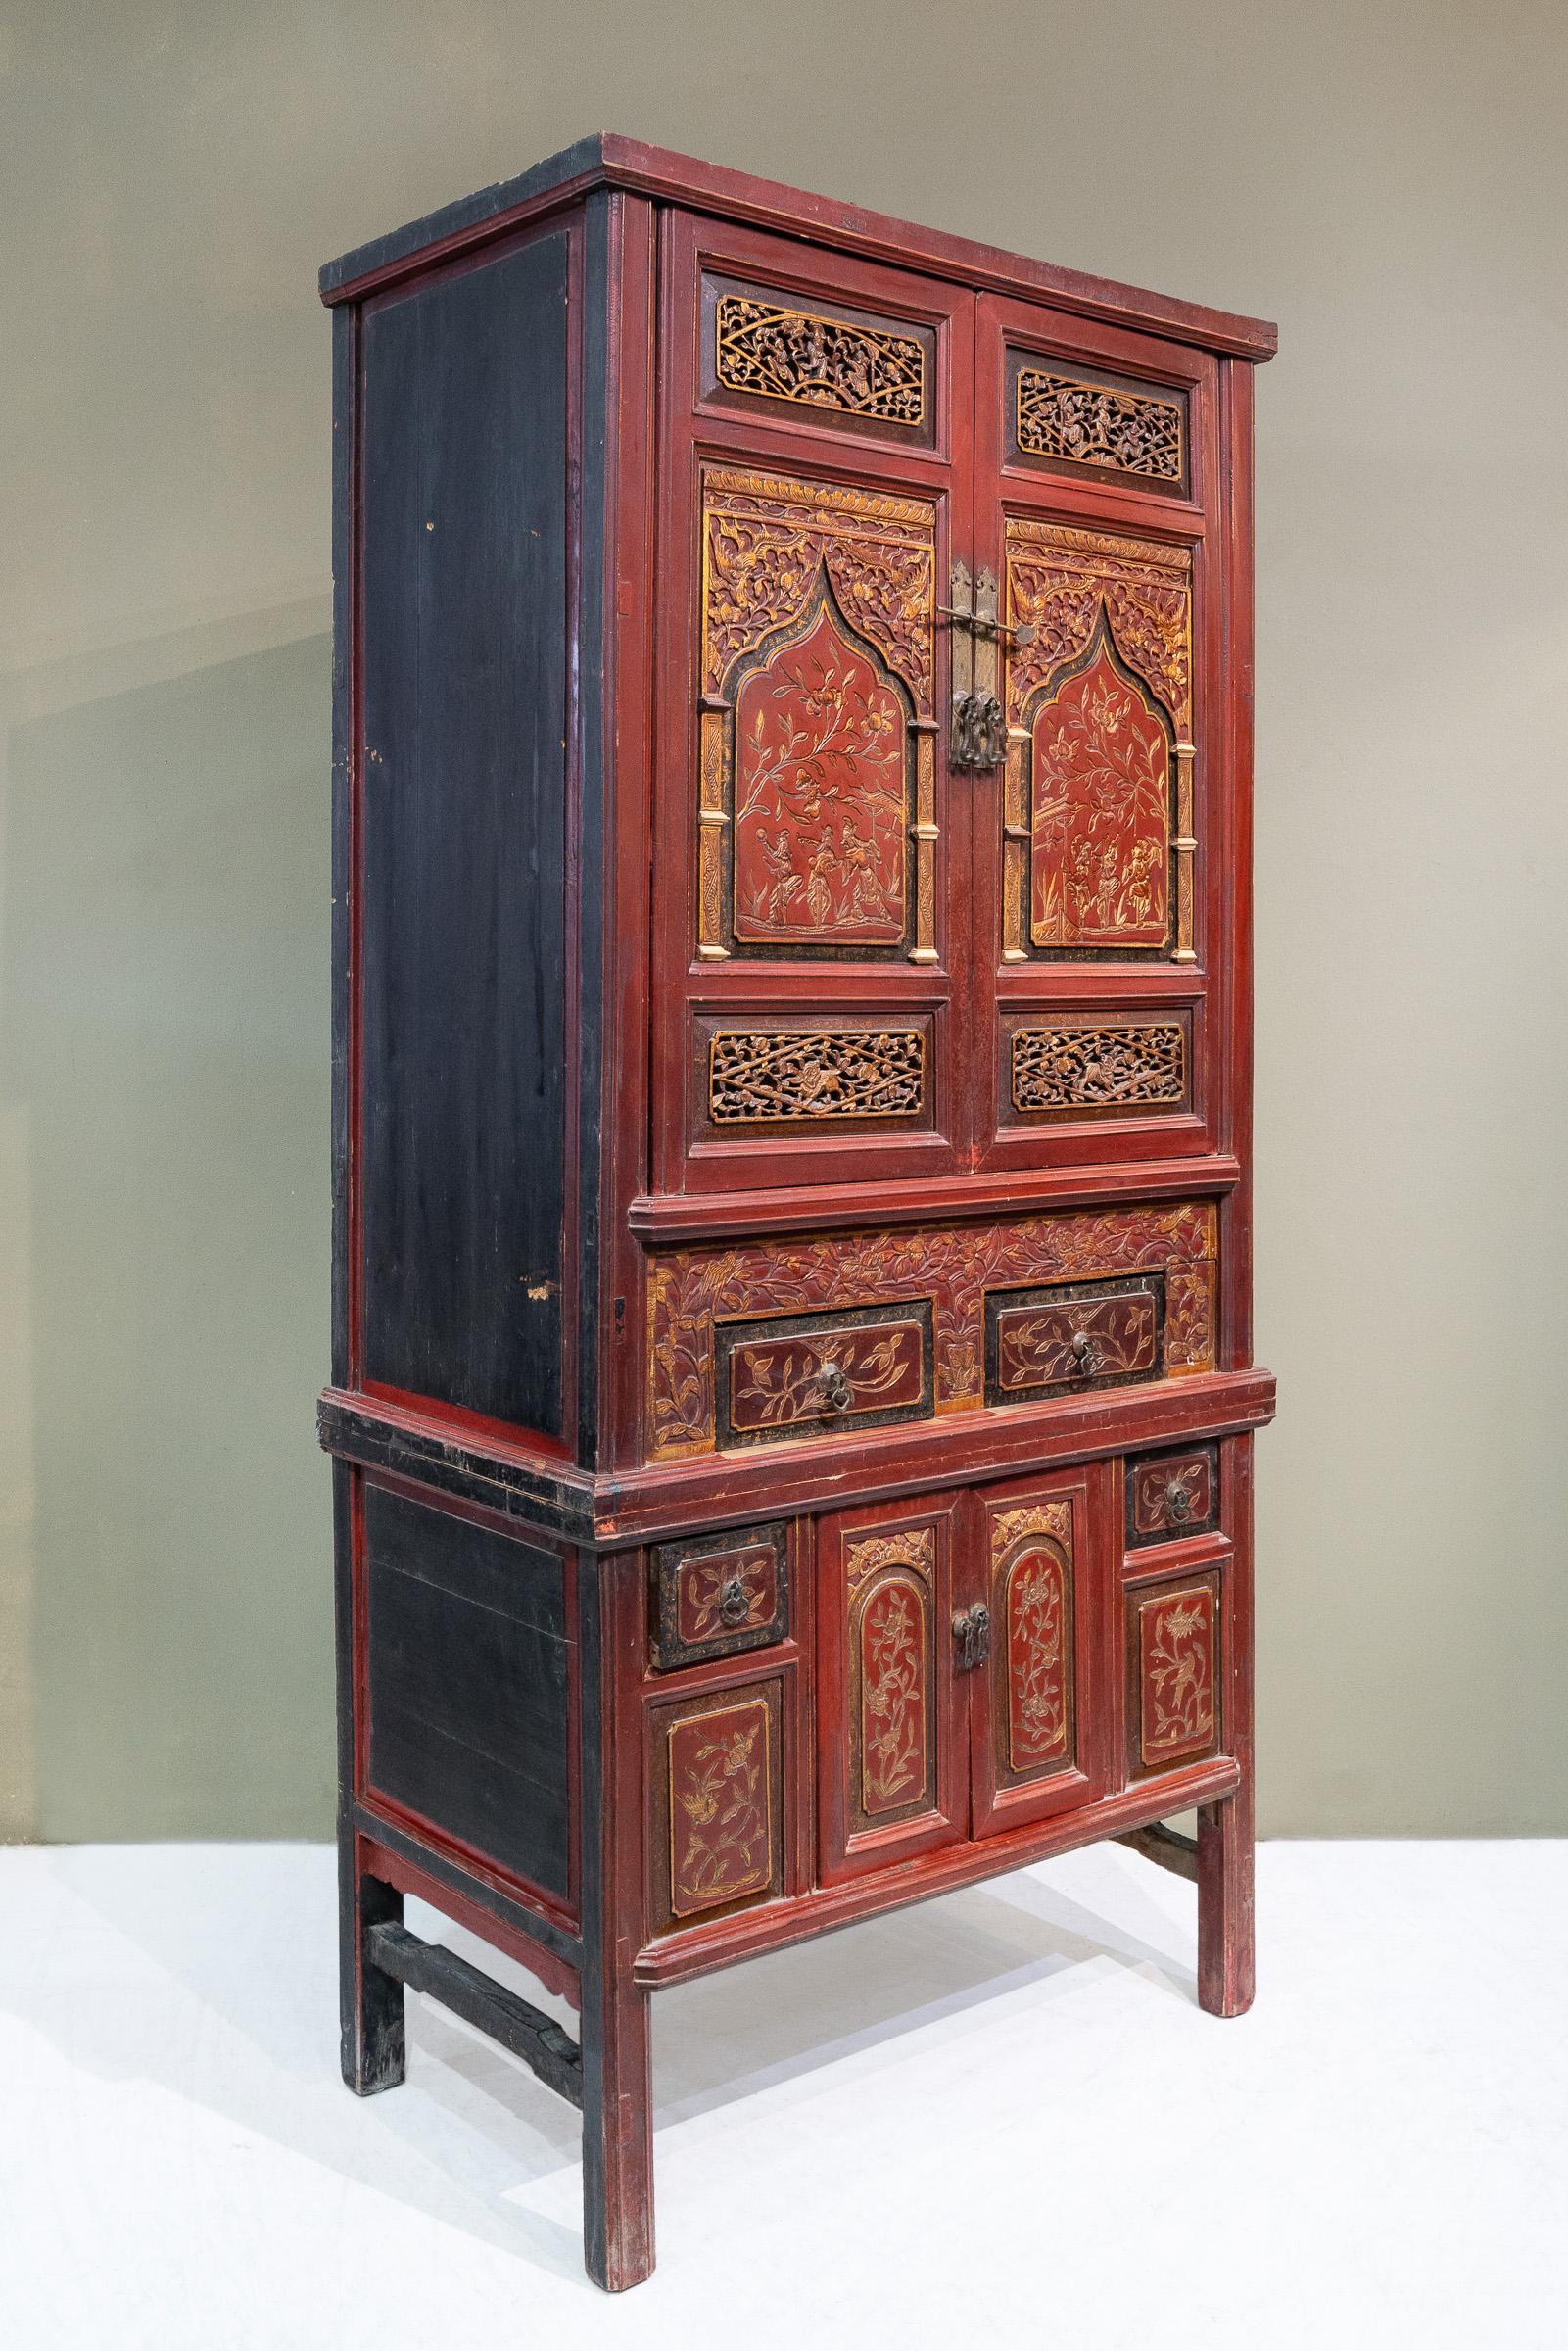 An early 20th century 2-tier carved cabinet from Fujian province, specifically Quanzhou city, China. There is nice combination of through and relief carvings throughout this cabinet, and it is decorated with many auspicious symbols like the phoenix,